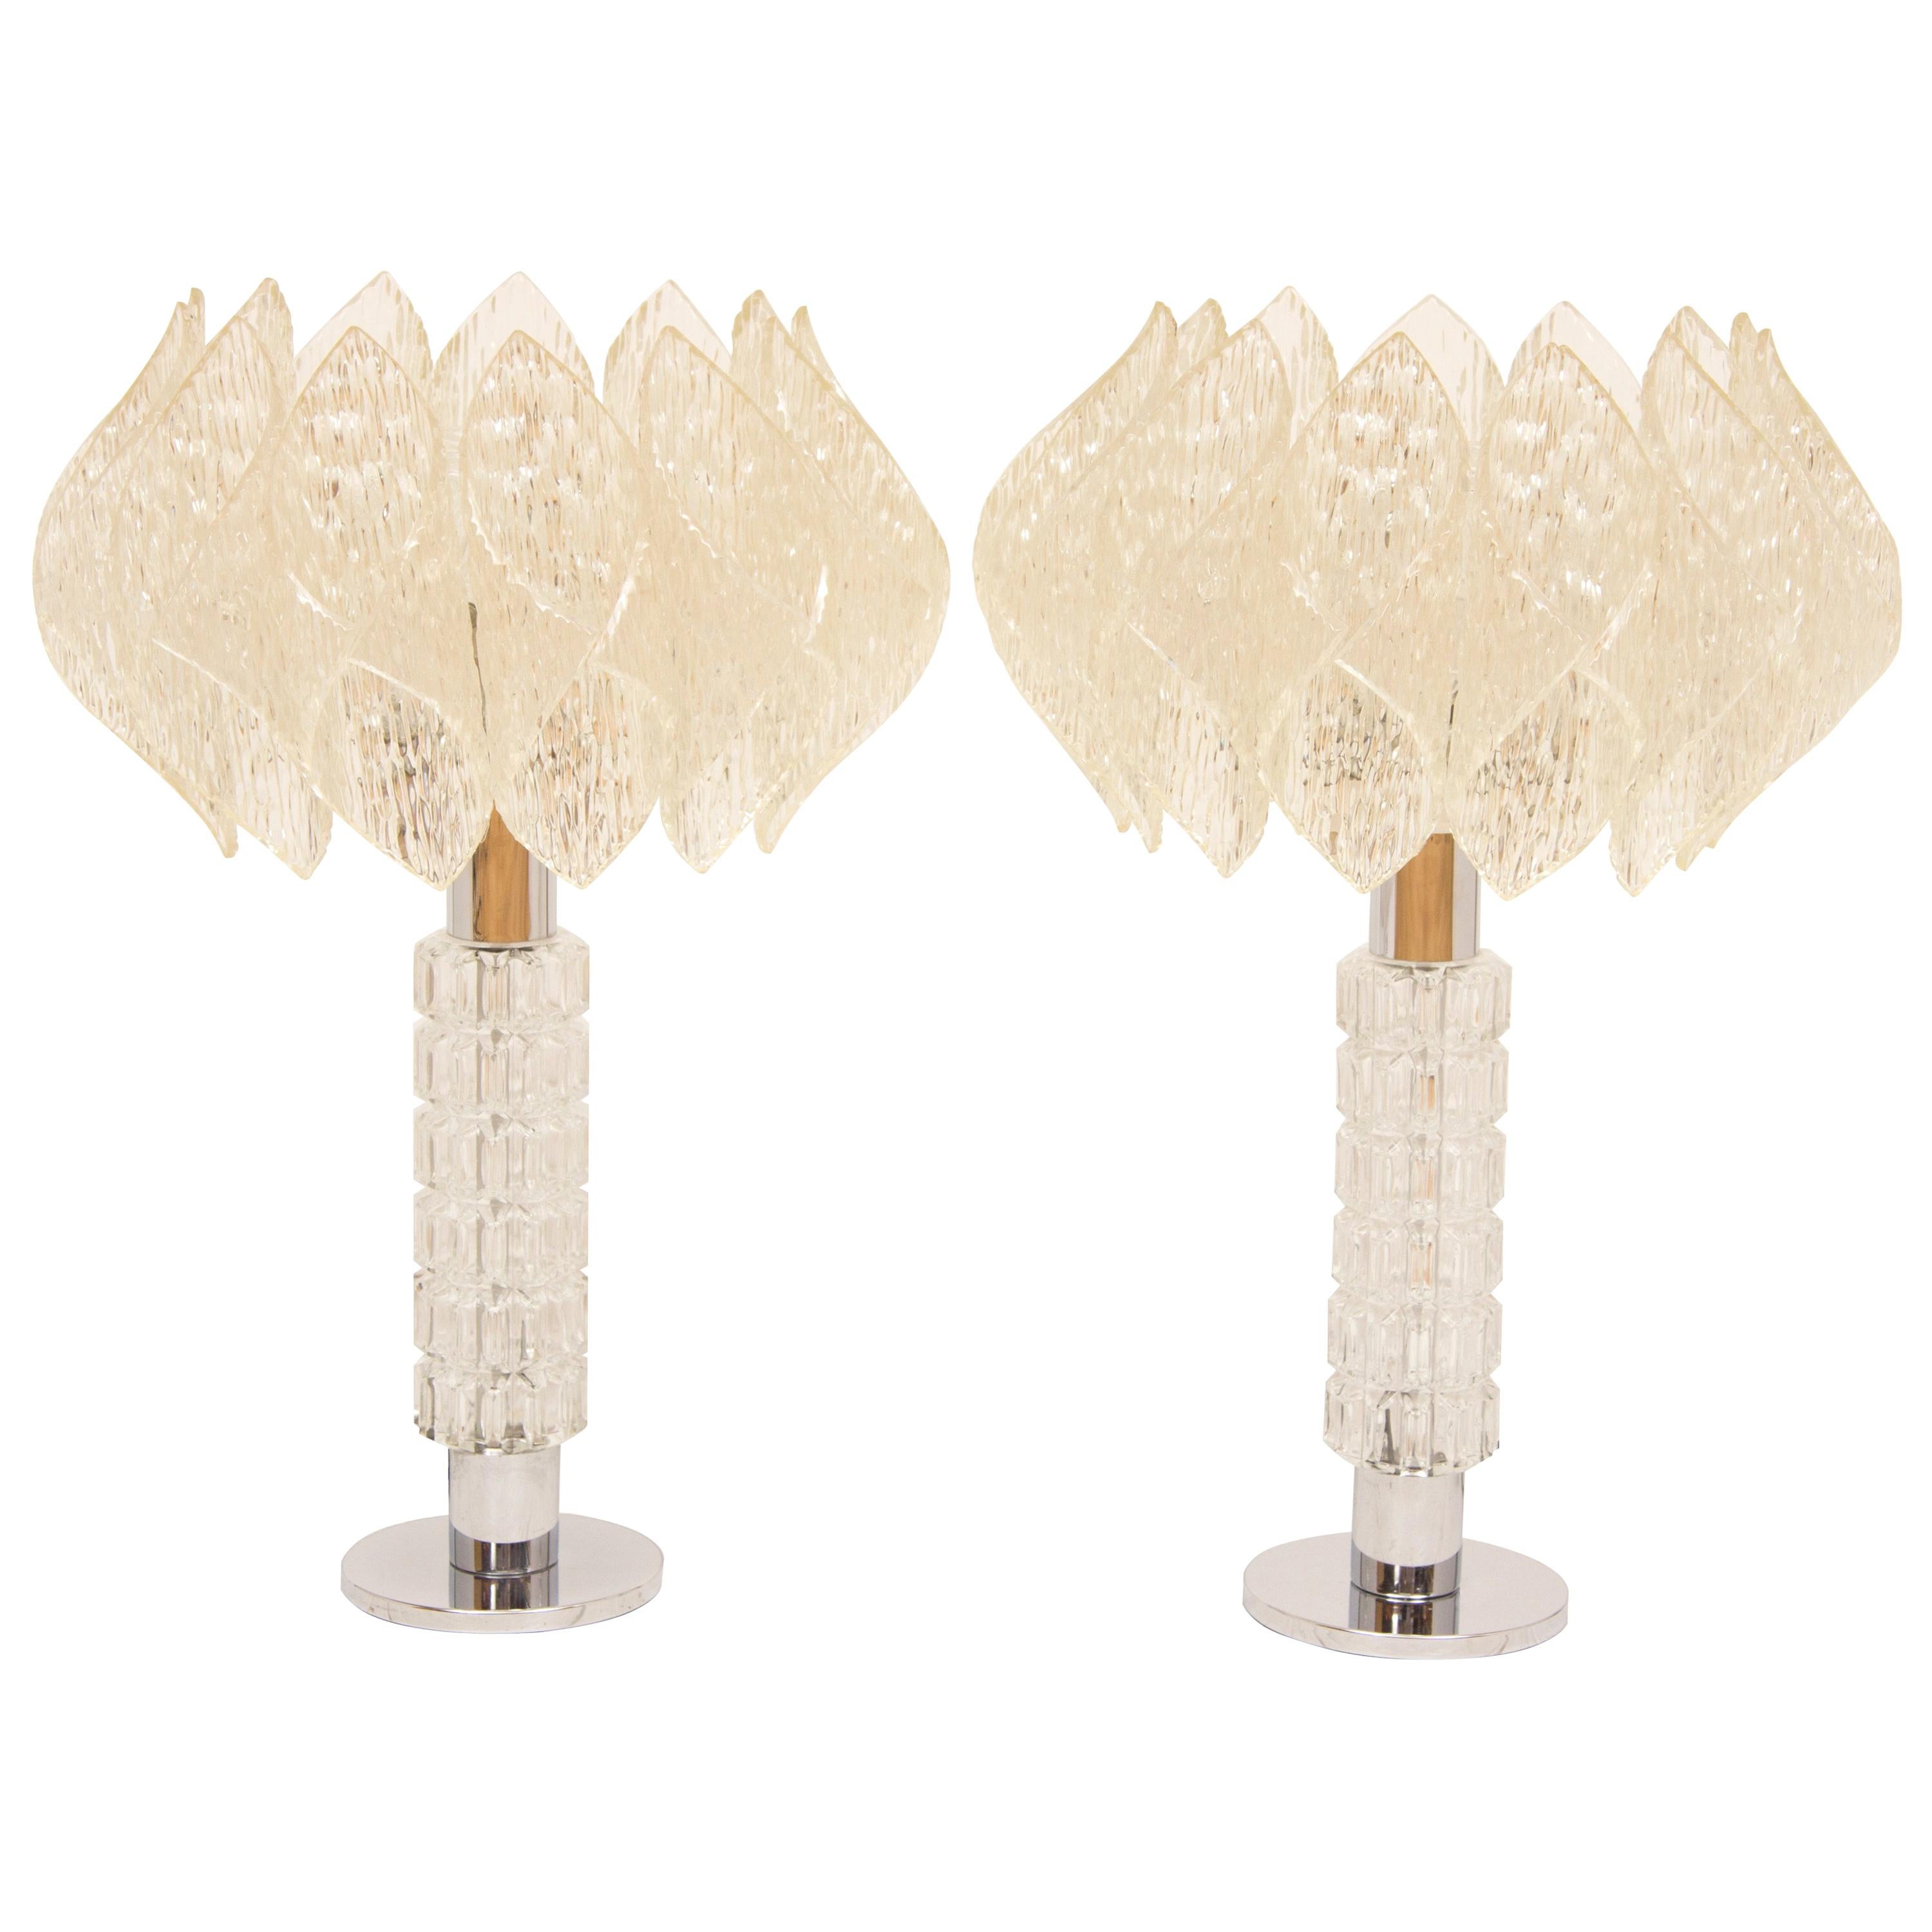 Impressive Midcentury Table Lamps For Sale